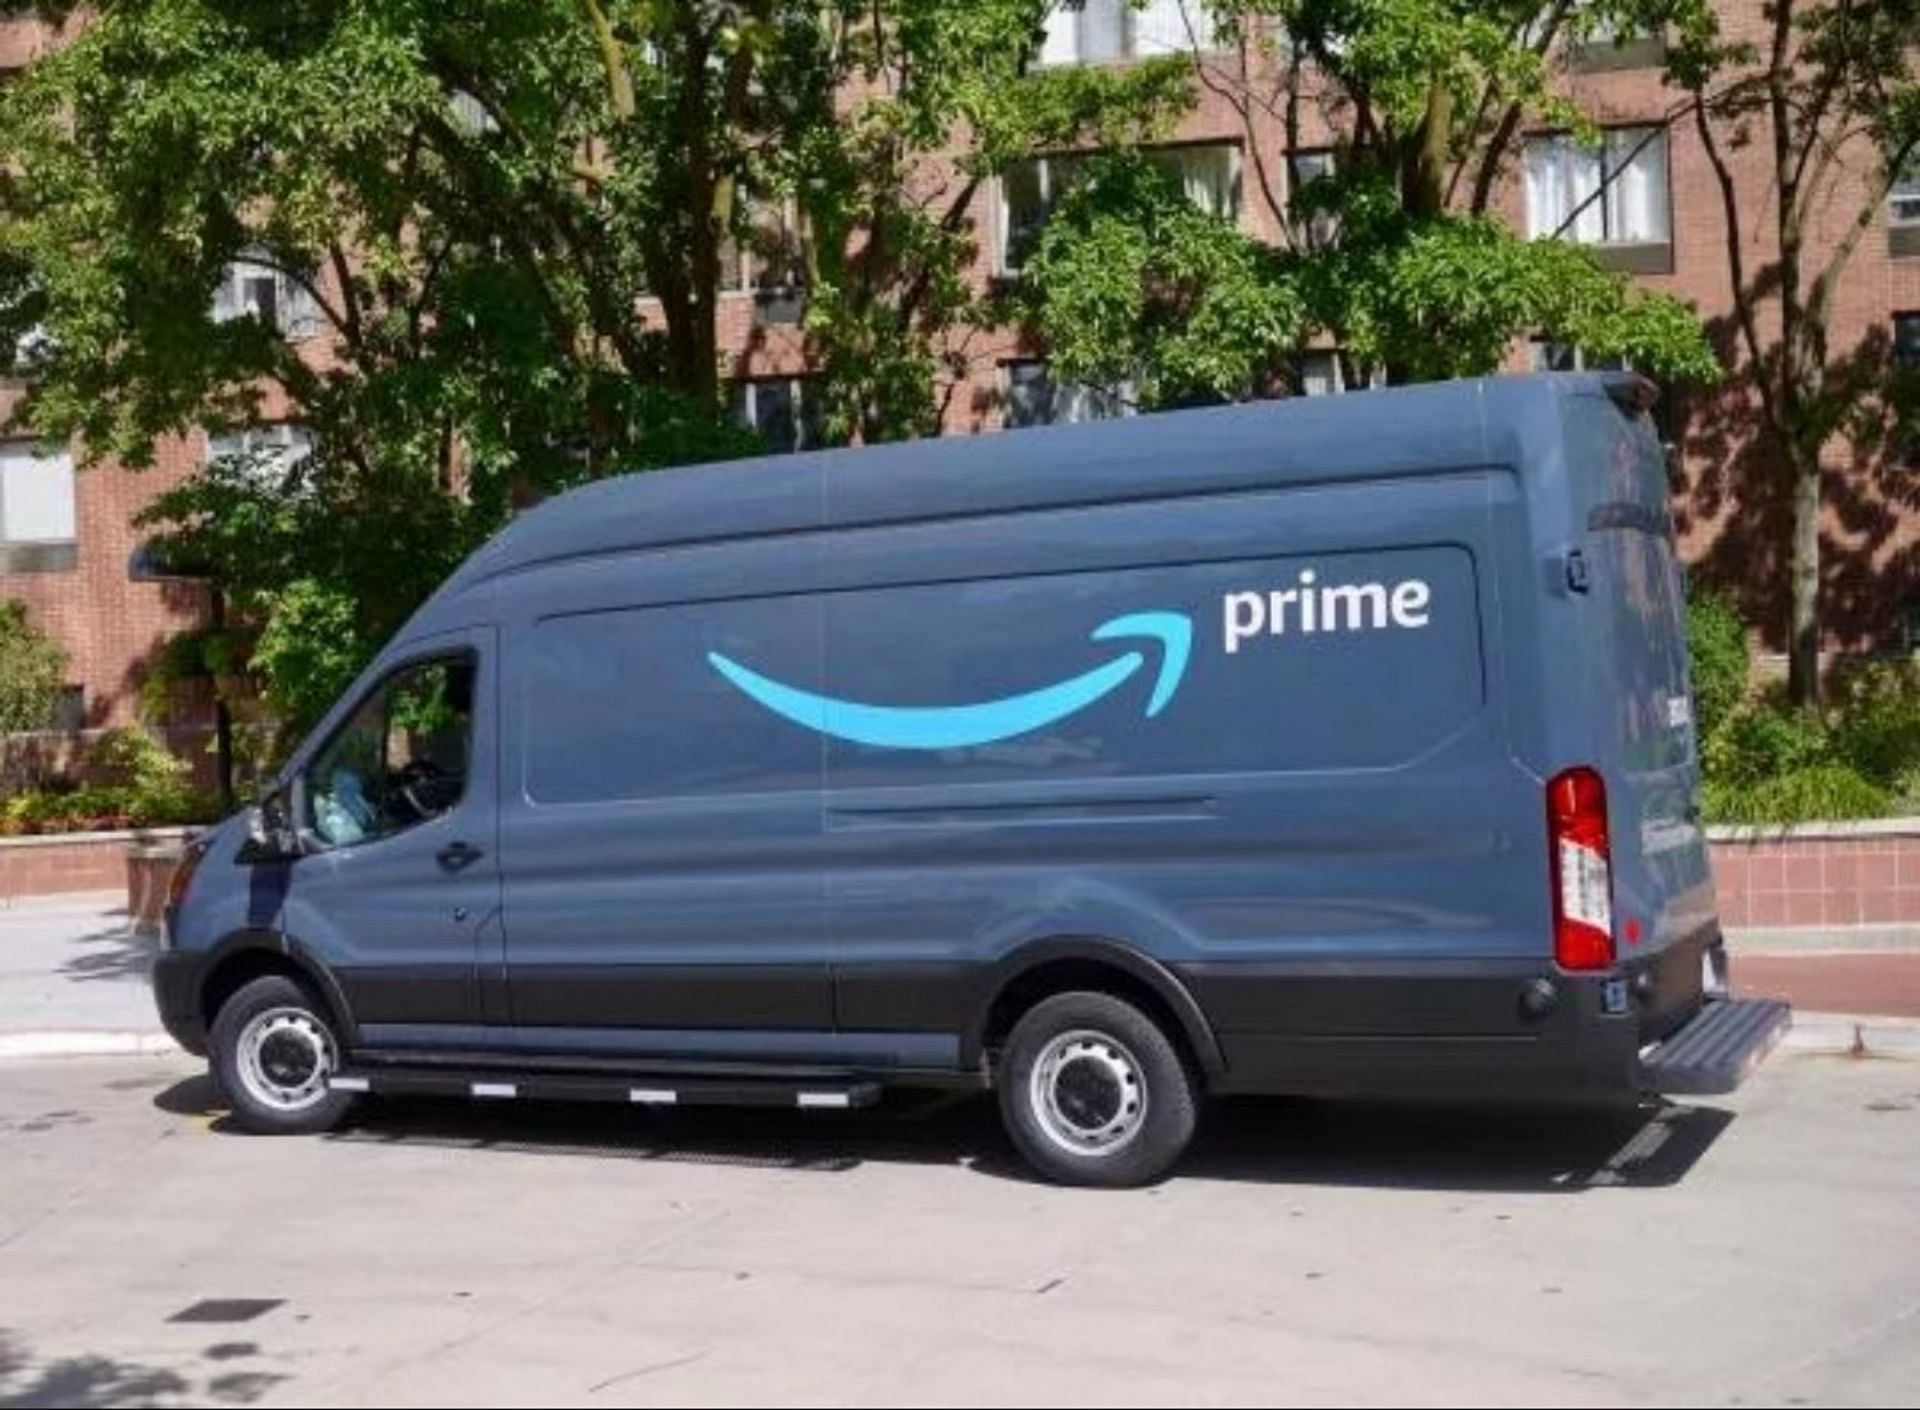 TikTok video showcasing an exchange between an Amazon delivery agent and woman goes viral (Image via Getty Images)